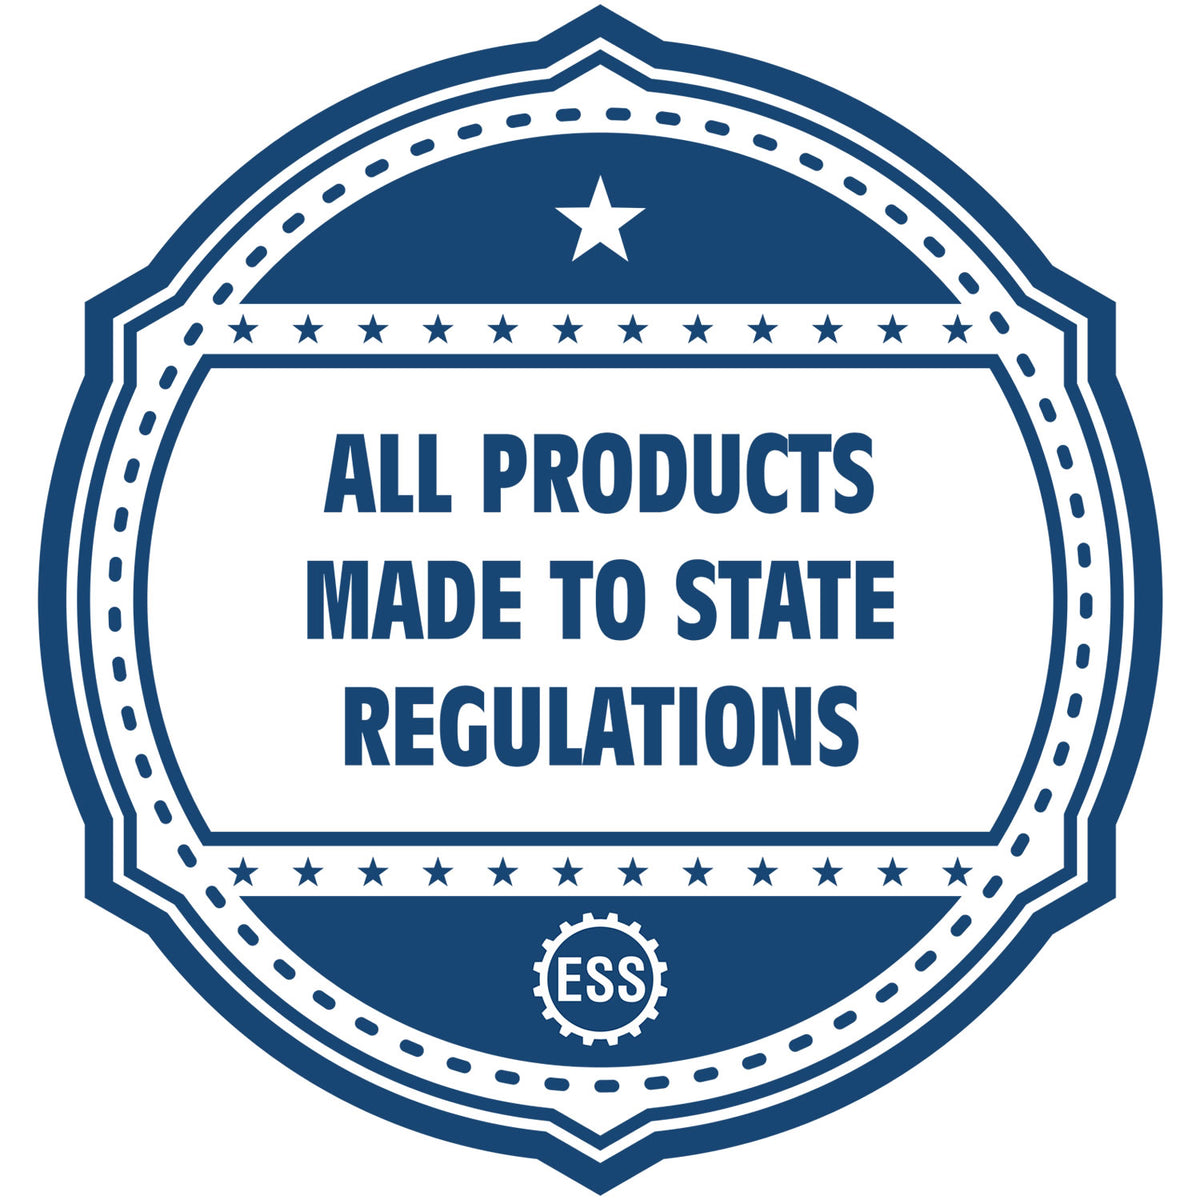 An icon or badge element for the Handheld Nevada Architect Seal Embosser showing that this product is made in compliance with state regulations.